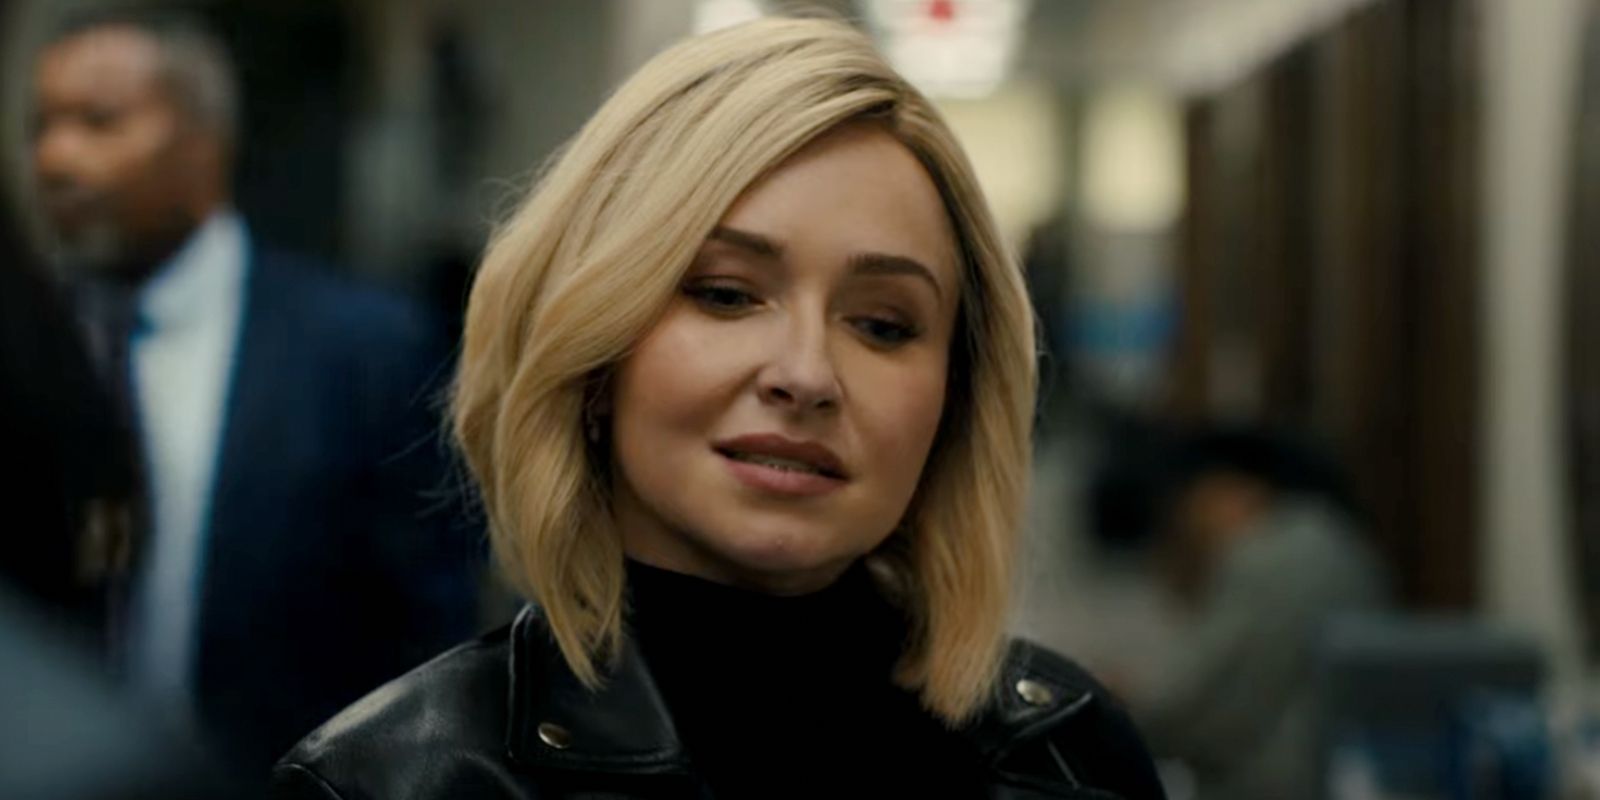 Hayden Panettiere as Kirby Reed in the Scream 6 trailer